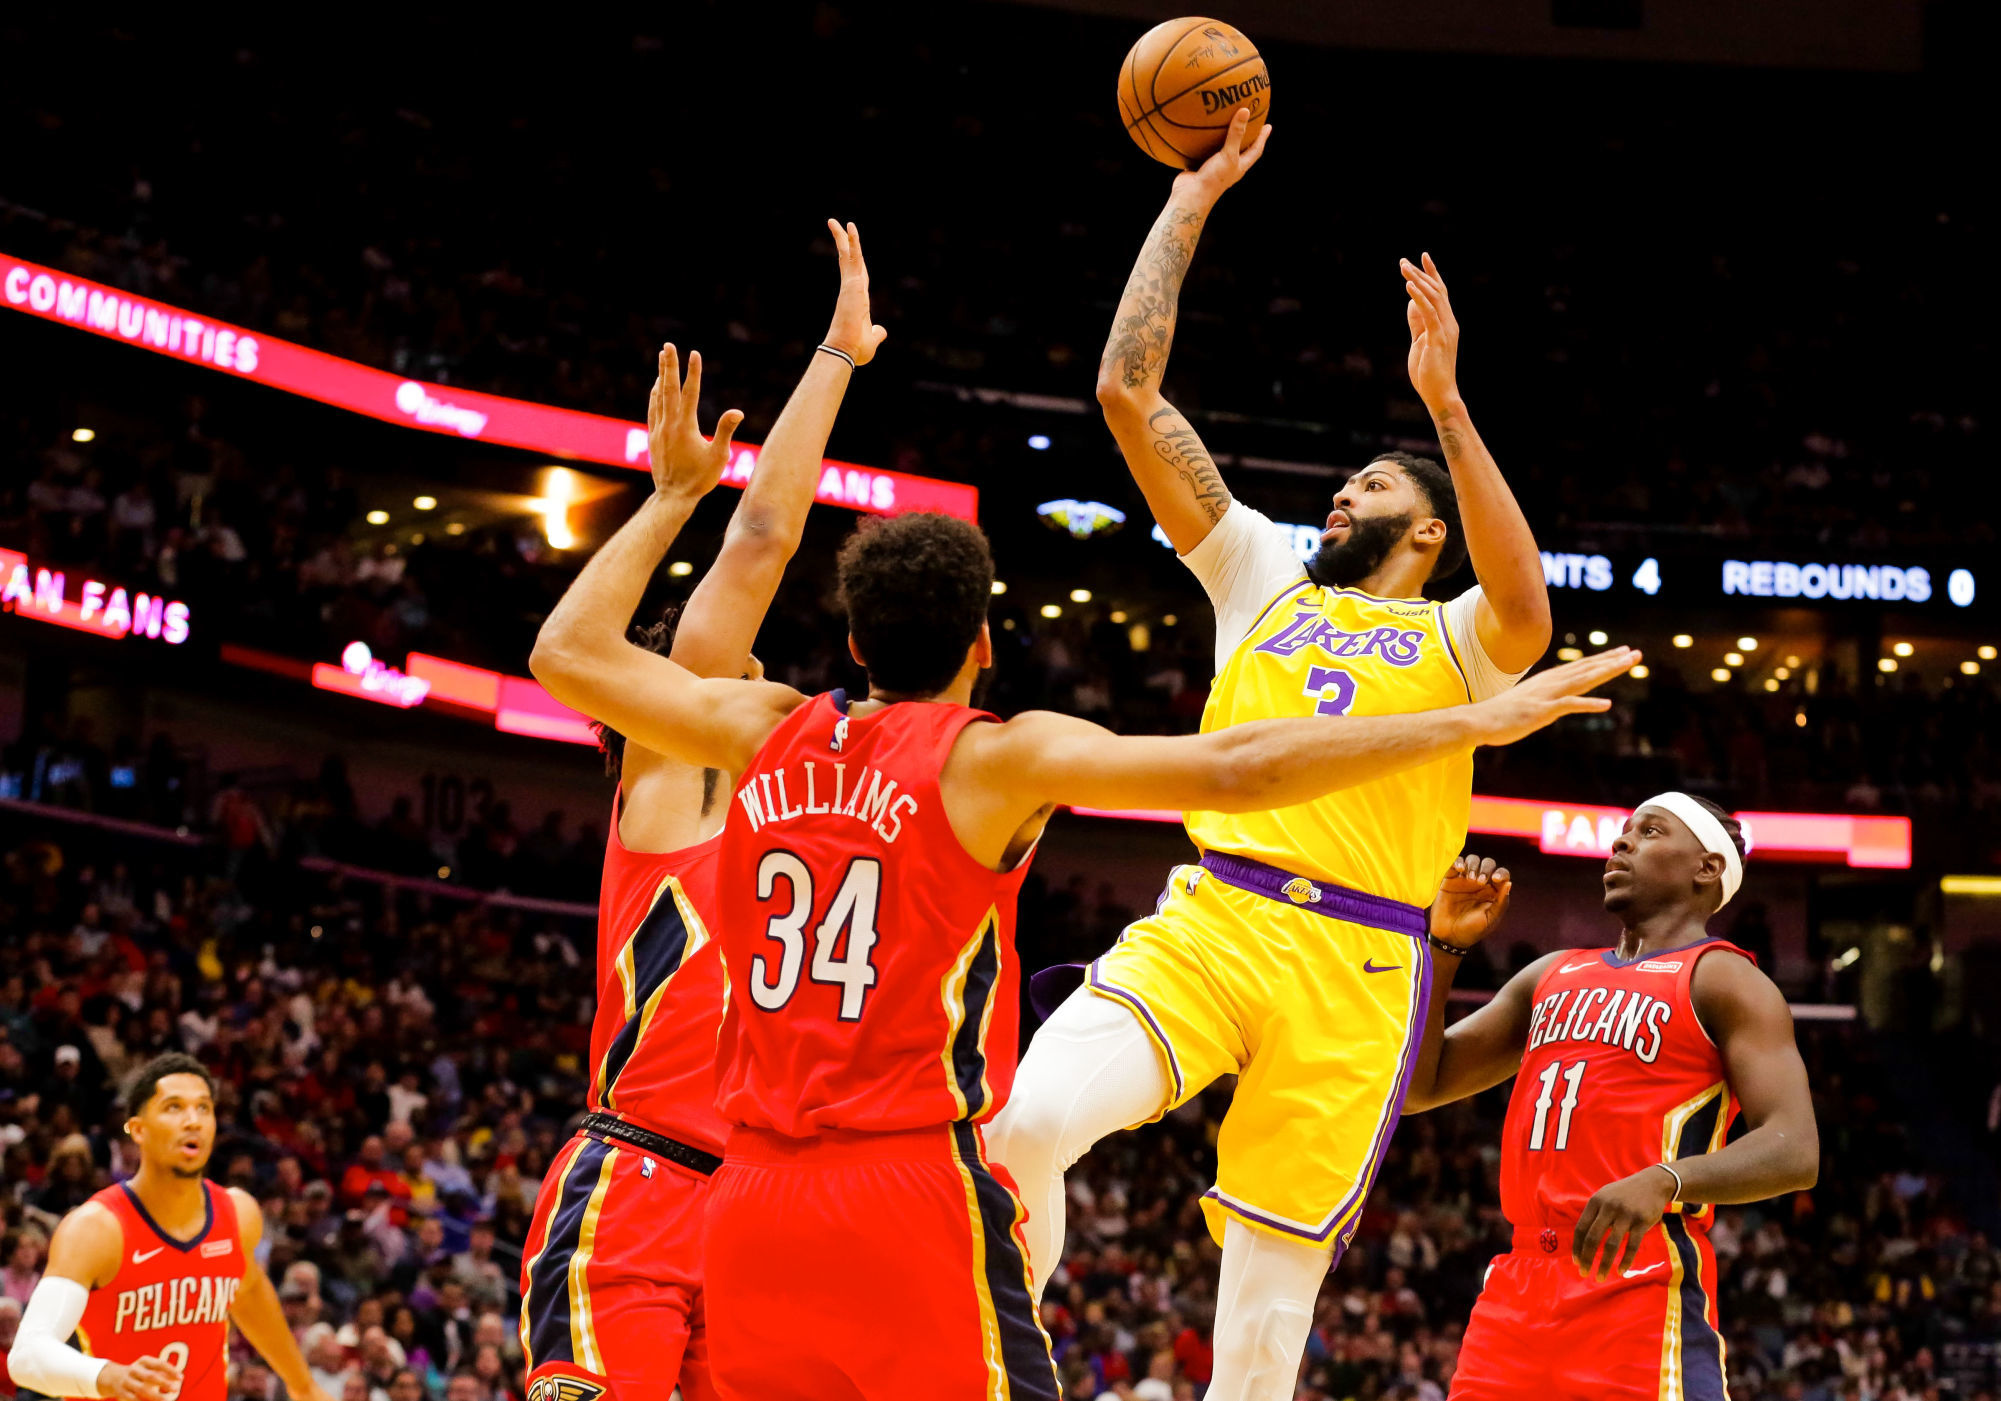 Nov 27, 2019; New Orleans, LA, USA; Los Angeles Lakers forward Anthony Davis (3) shoots over New Orleans Pelicans guard Jrue Holiday (11) and guard Kenrich Williams (34) and center Jaxson Hayes (10) during the first quarter at the Smoothie King Center. Mandatory Credit: Derick E. Hingle-USA TODAY Sports/Sipa USA 

Photo by Icon Sport - Jaxson HAYES - Kenrich WILLIAMS - Jrue HOLIDAY - Anthony DAVIS - Smoothie King Center - Nouvelle Orleans (Etats Unis)